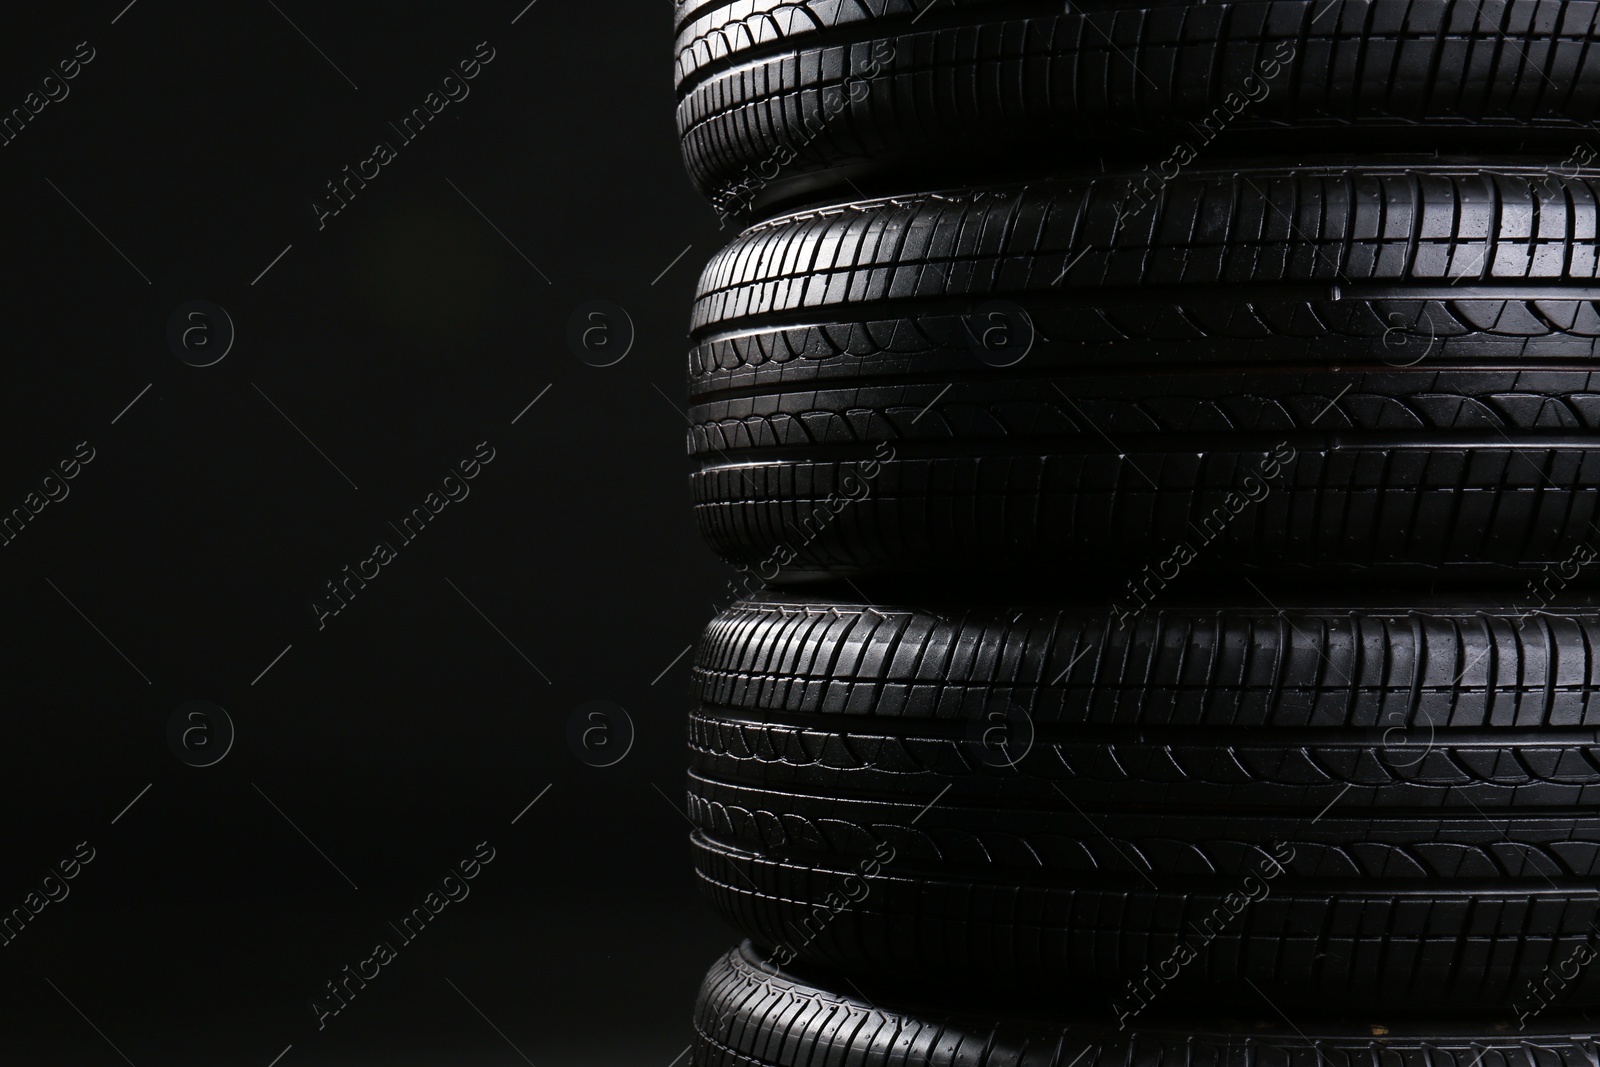 Photo of Stack of car tires on black background, closeup